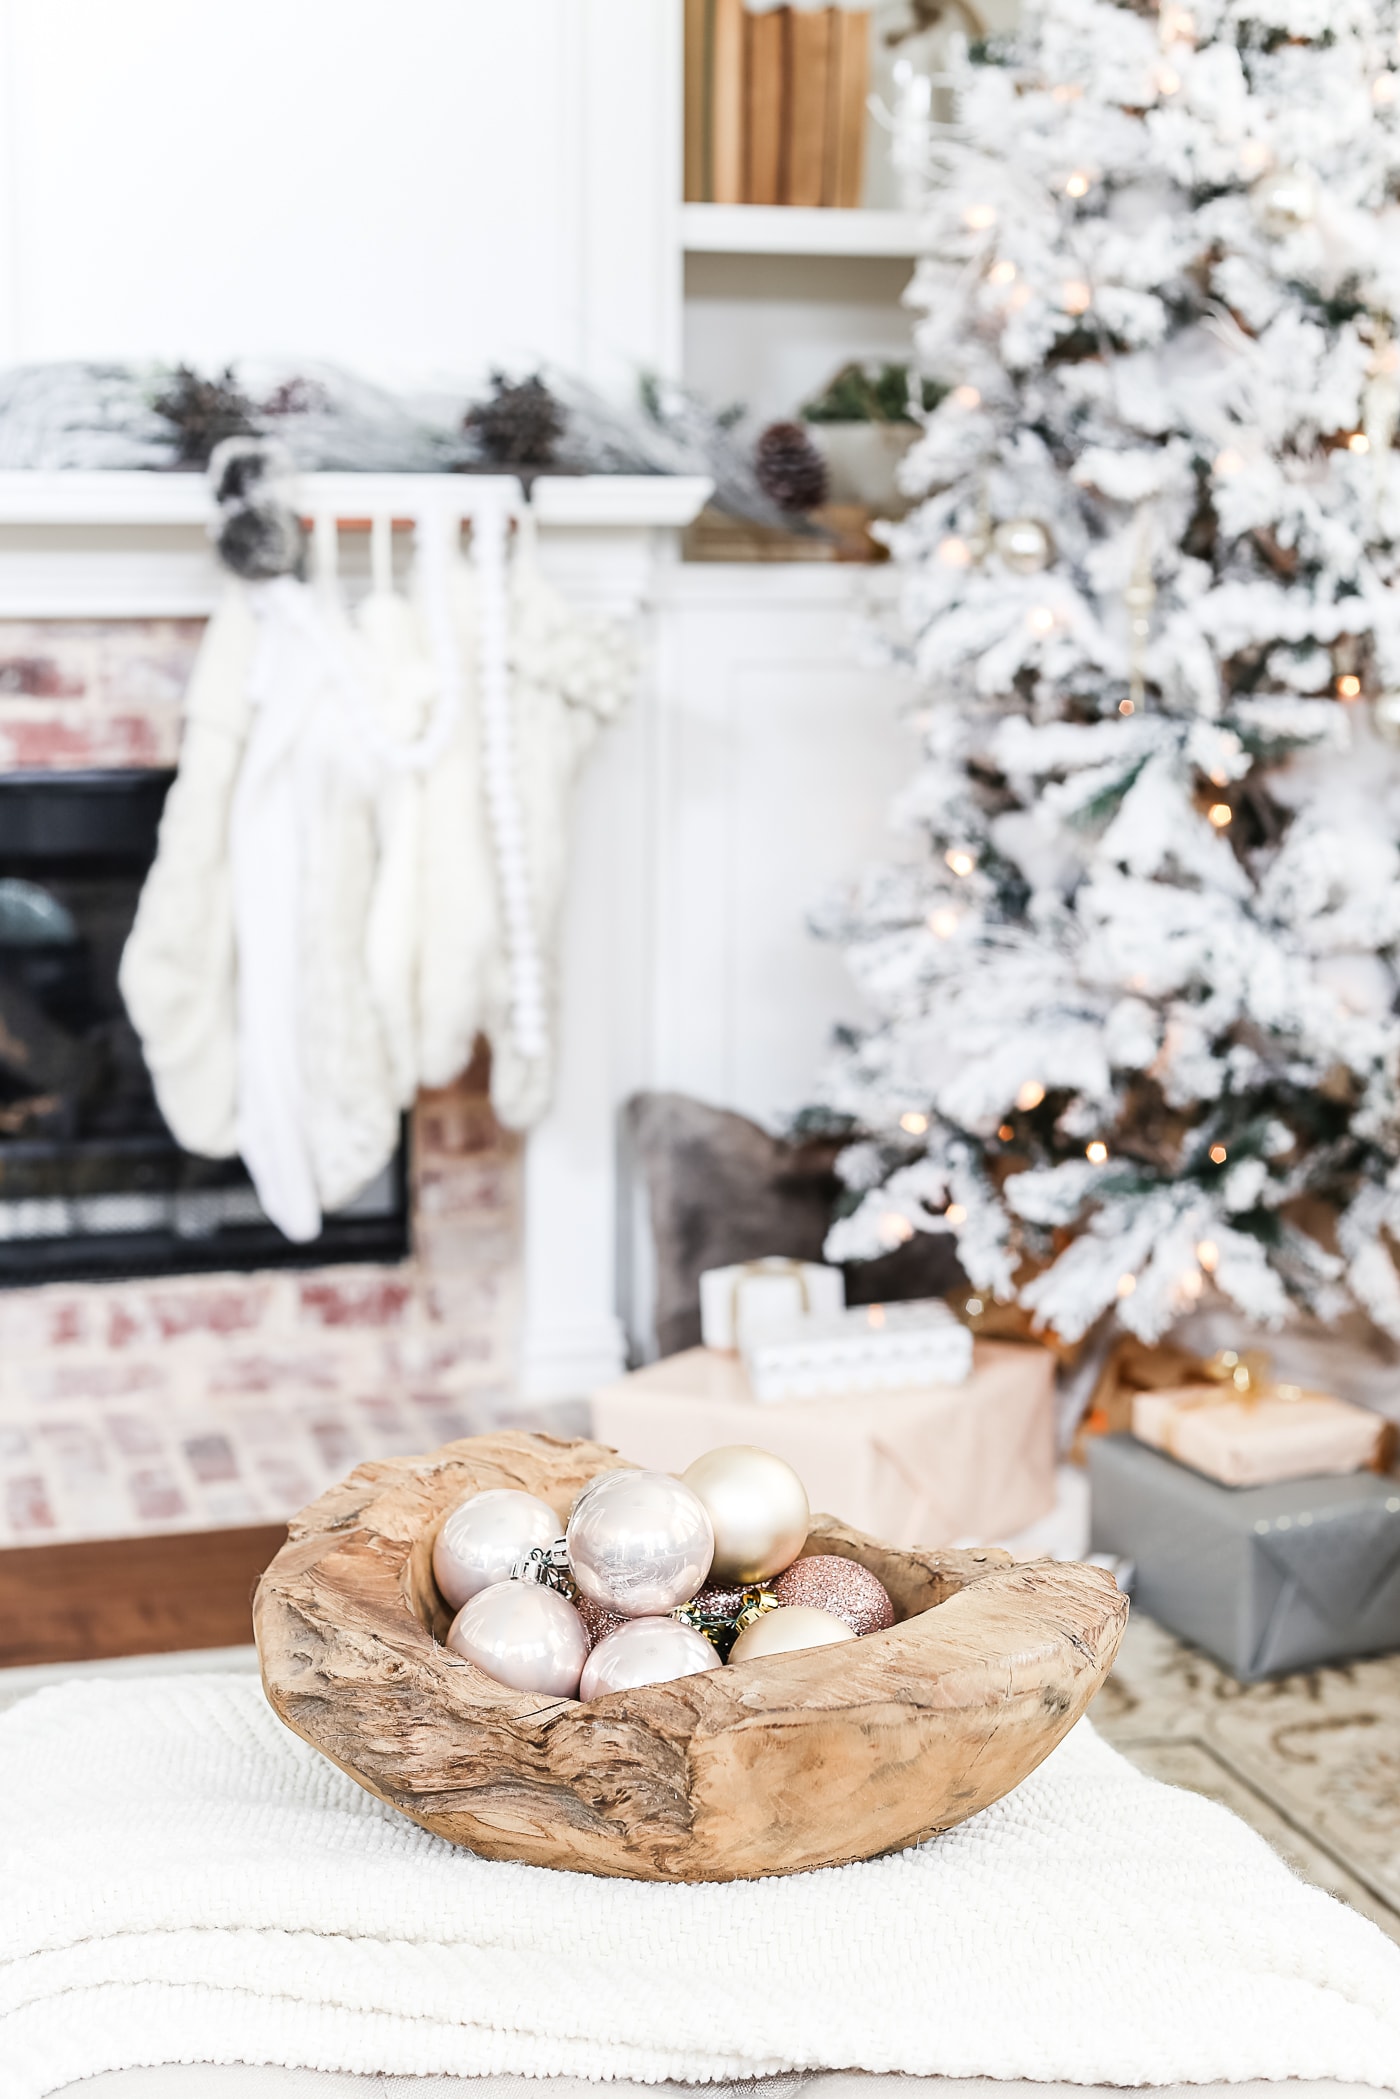 blush ornaments in a raw wood bowl make gorgeous neutral holiday decor #holidaydecorating